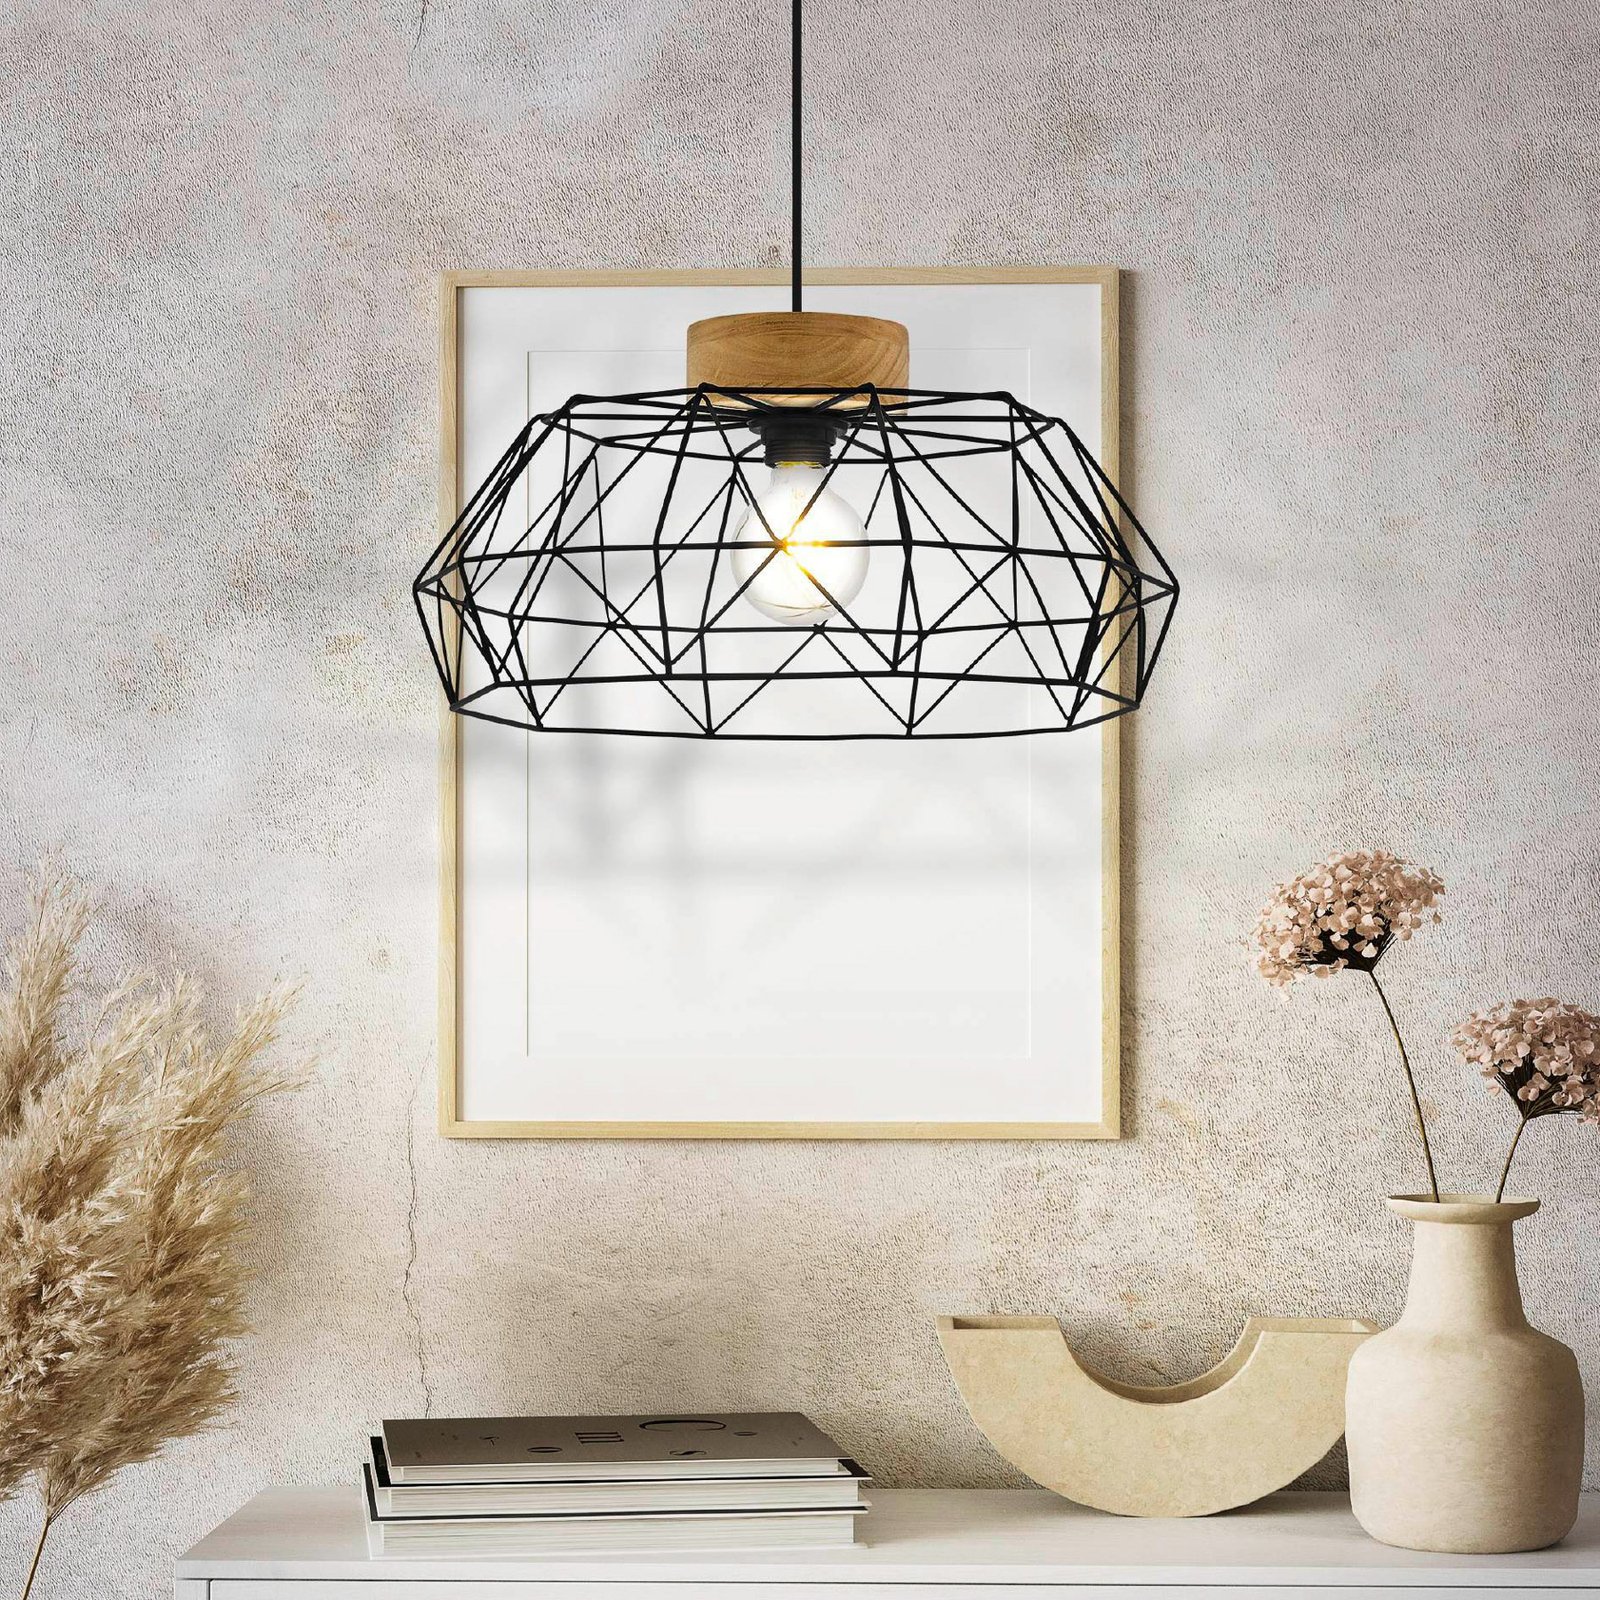 Padstowith hanging light, cage, wooden detail